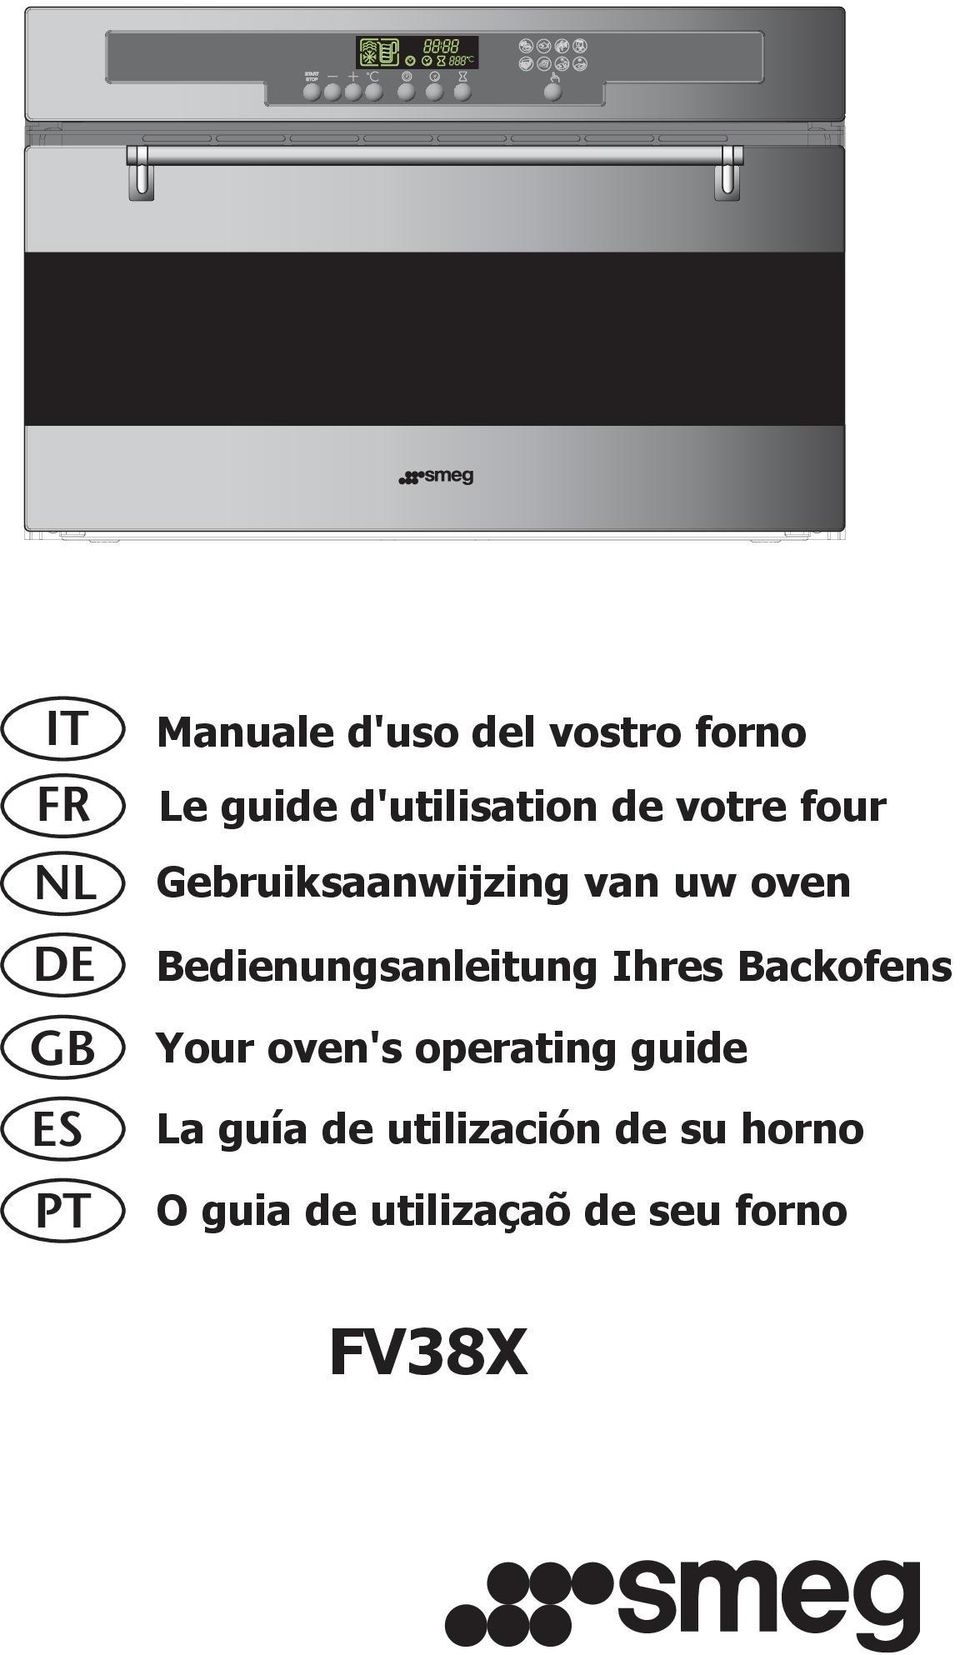 Bedienungsanleitung Ihres Backofens Your oven's operating guide